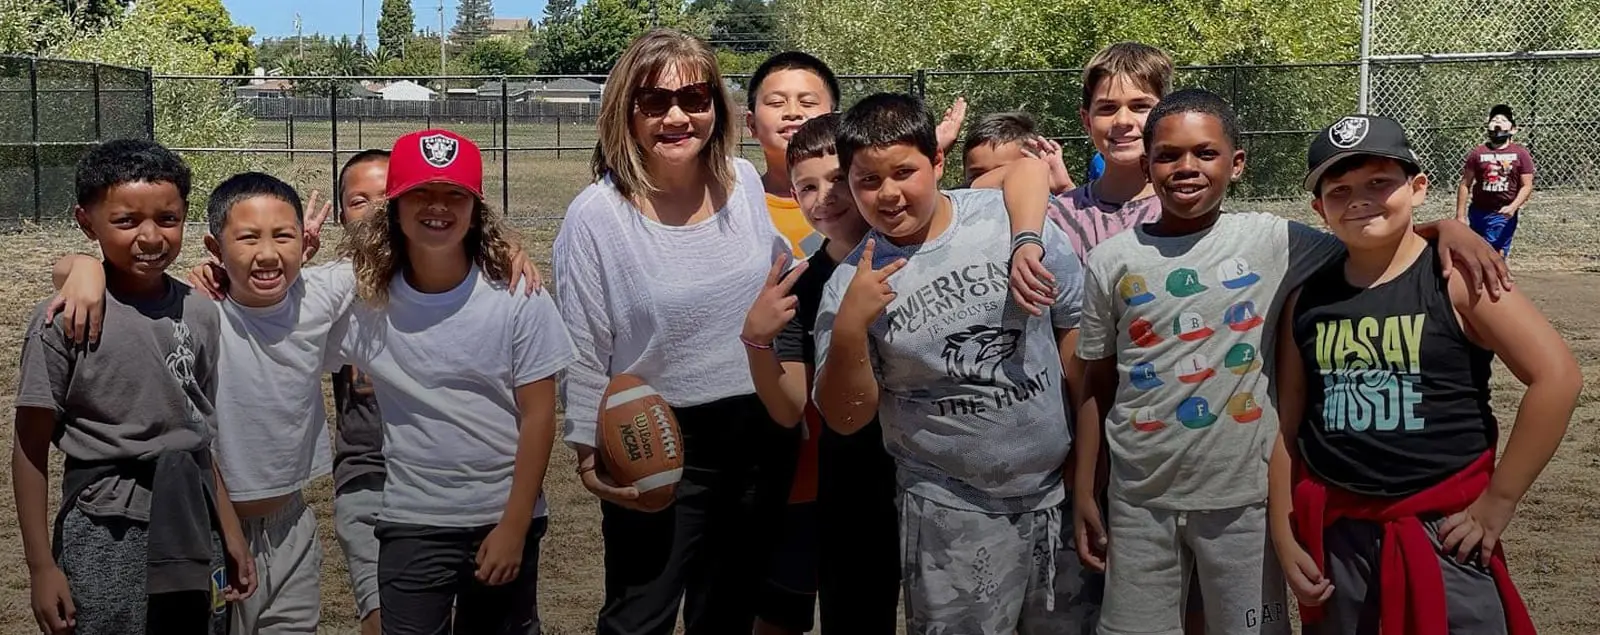 Employee holding a football and smiling with a group of students